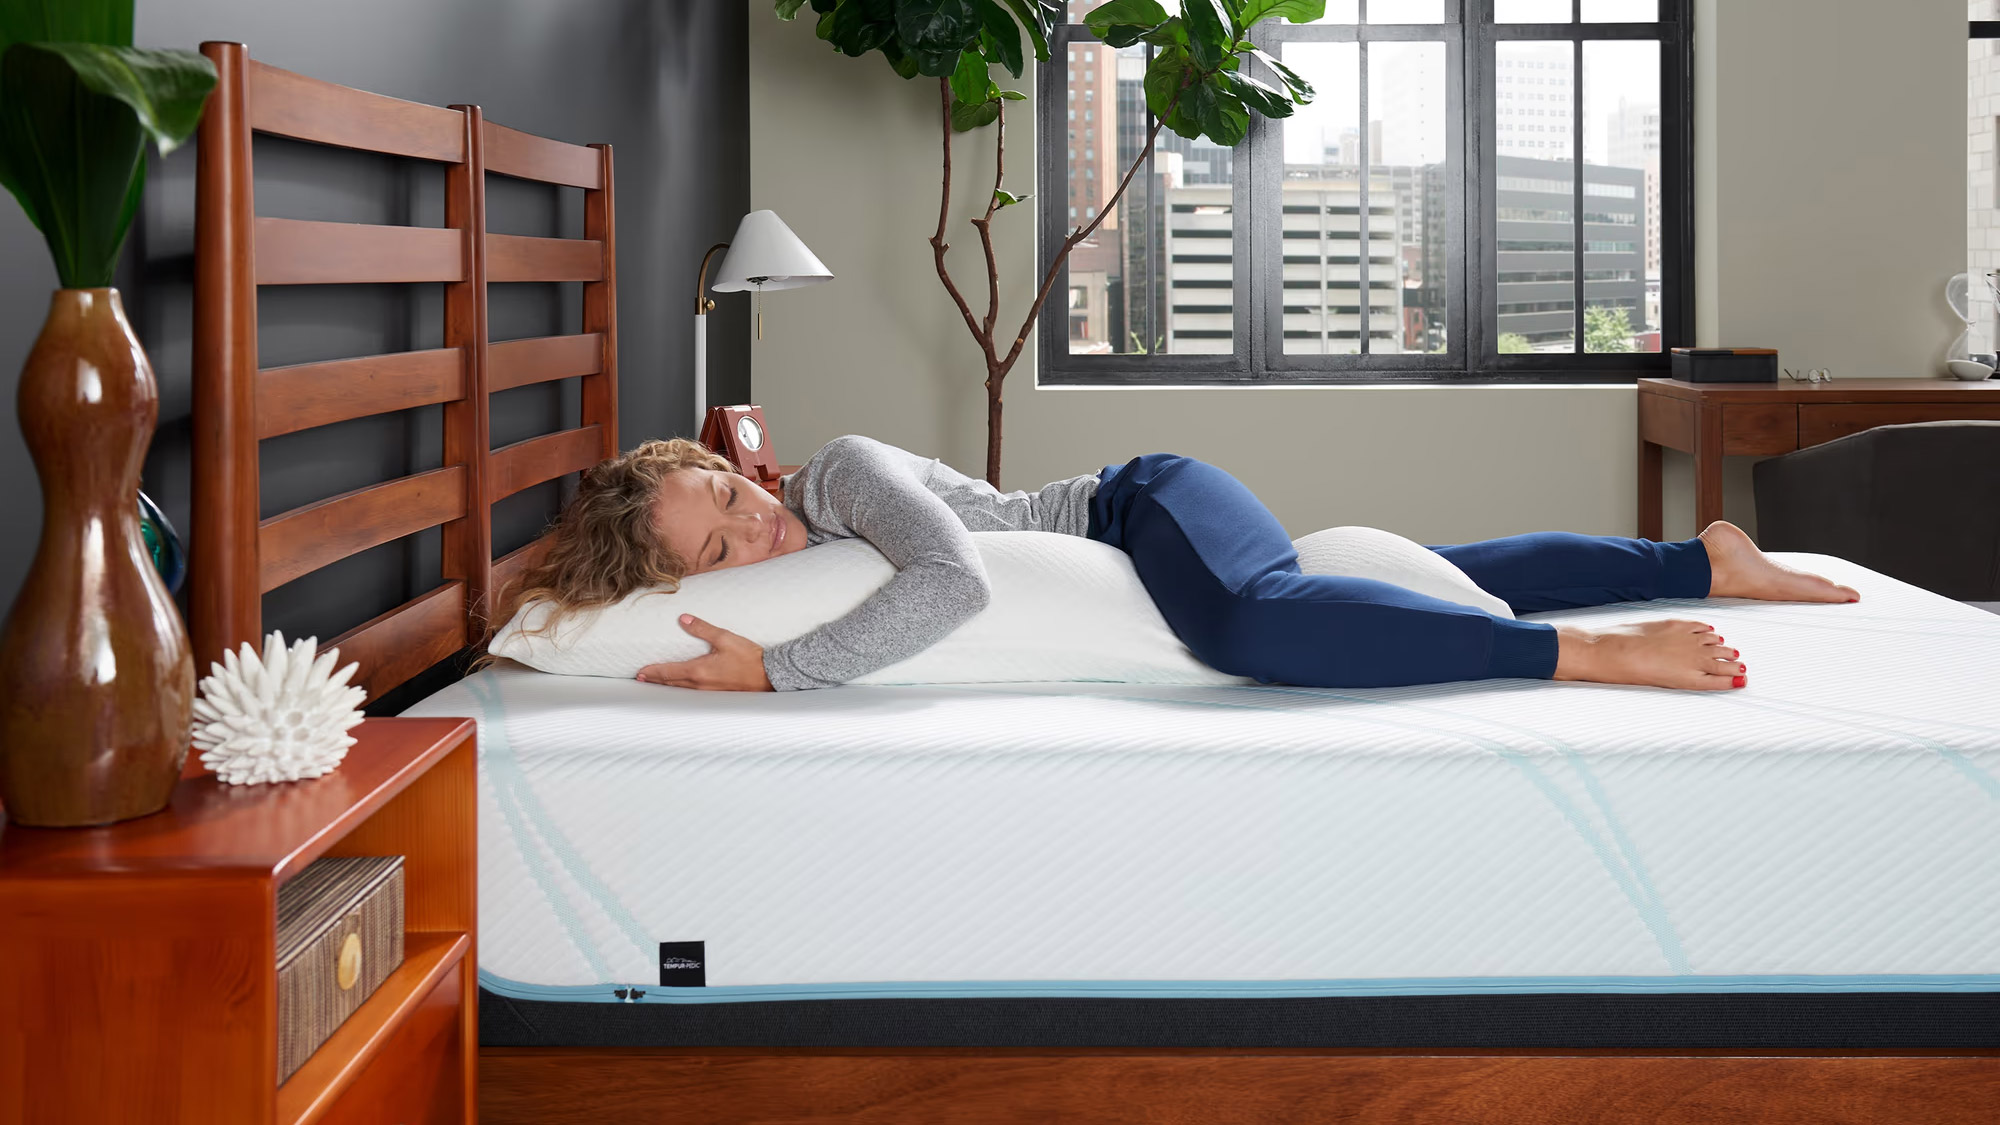 4 reasons why a body pillow should be your next sleep purchase | TechRadar